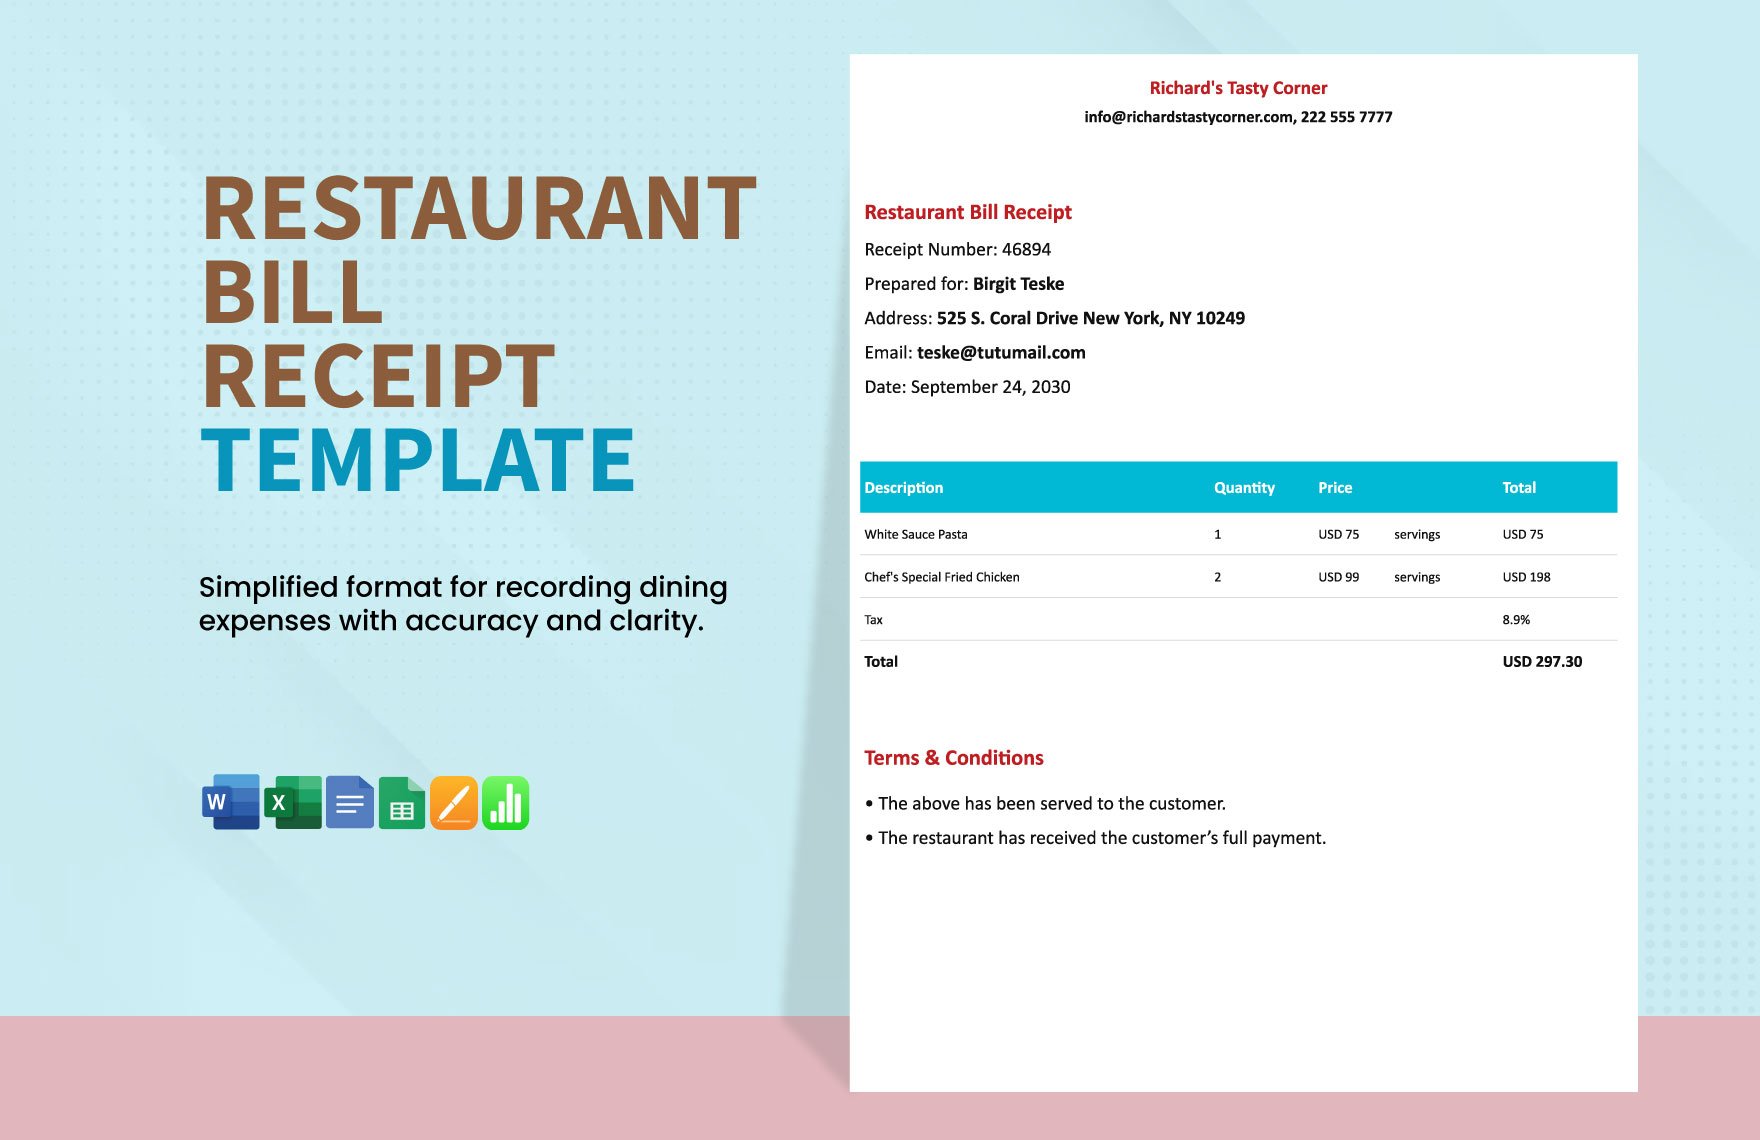 Restaurant Bill Receipt Template in Word, Google Docs, Excel, Google Sheets, Apple Pages, Apple Numbers